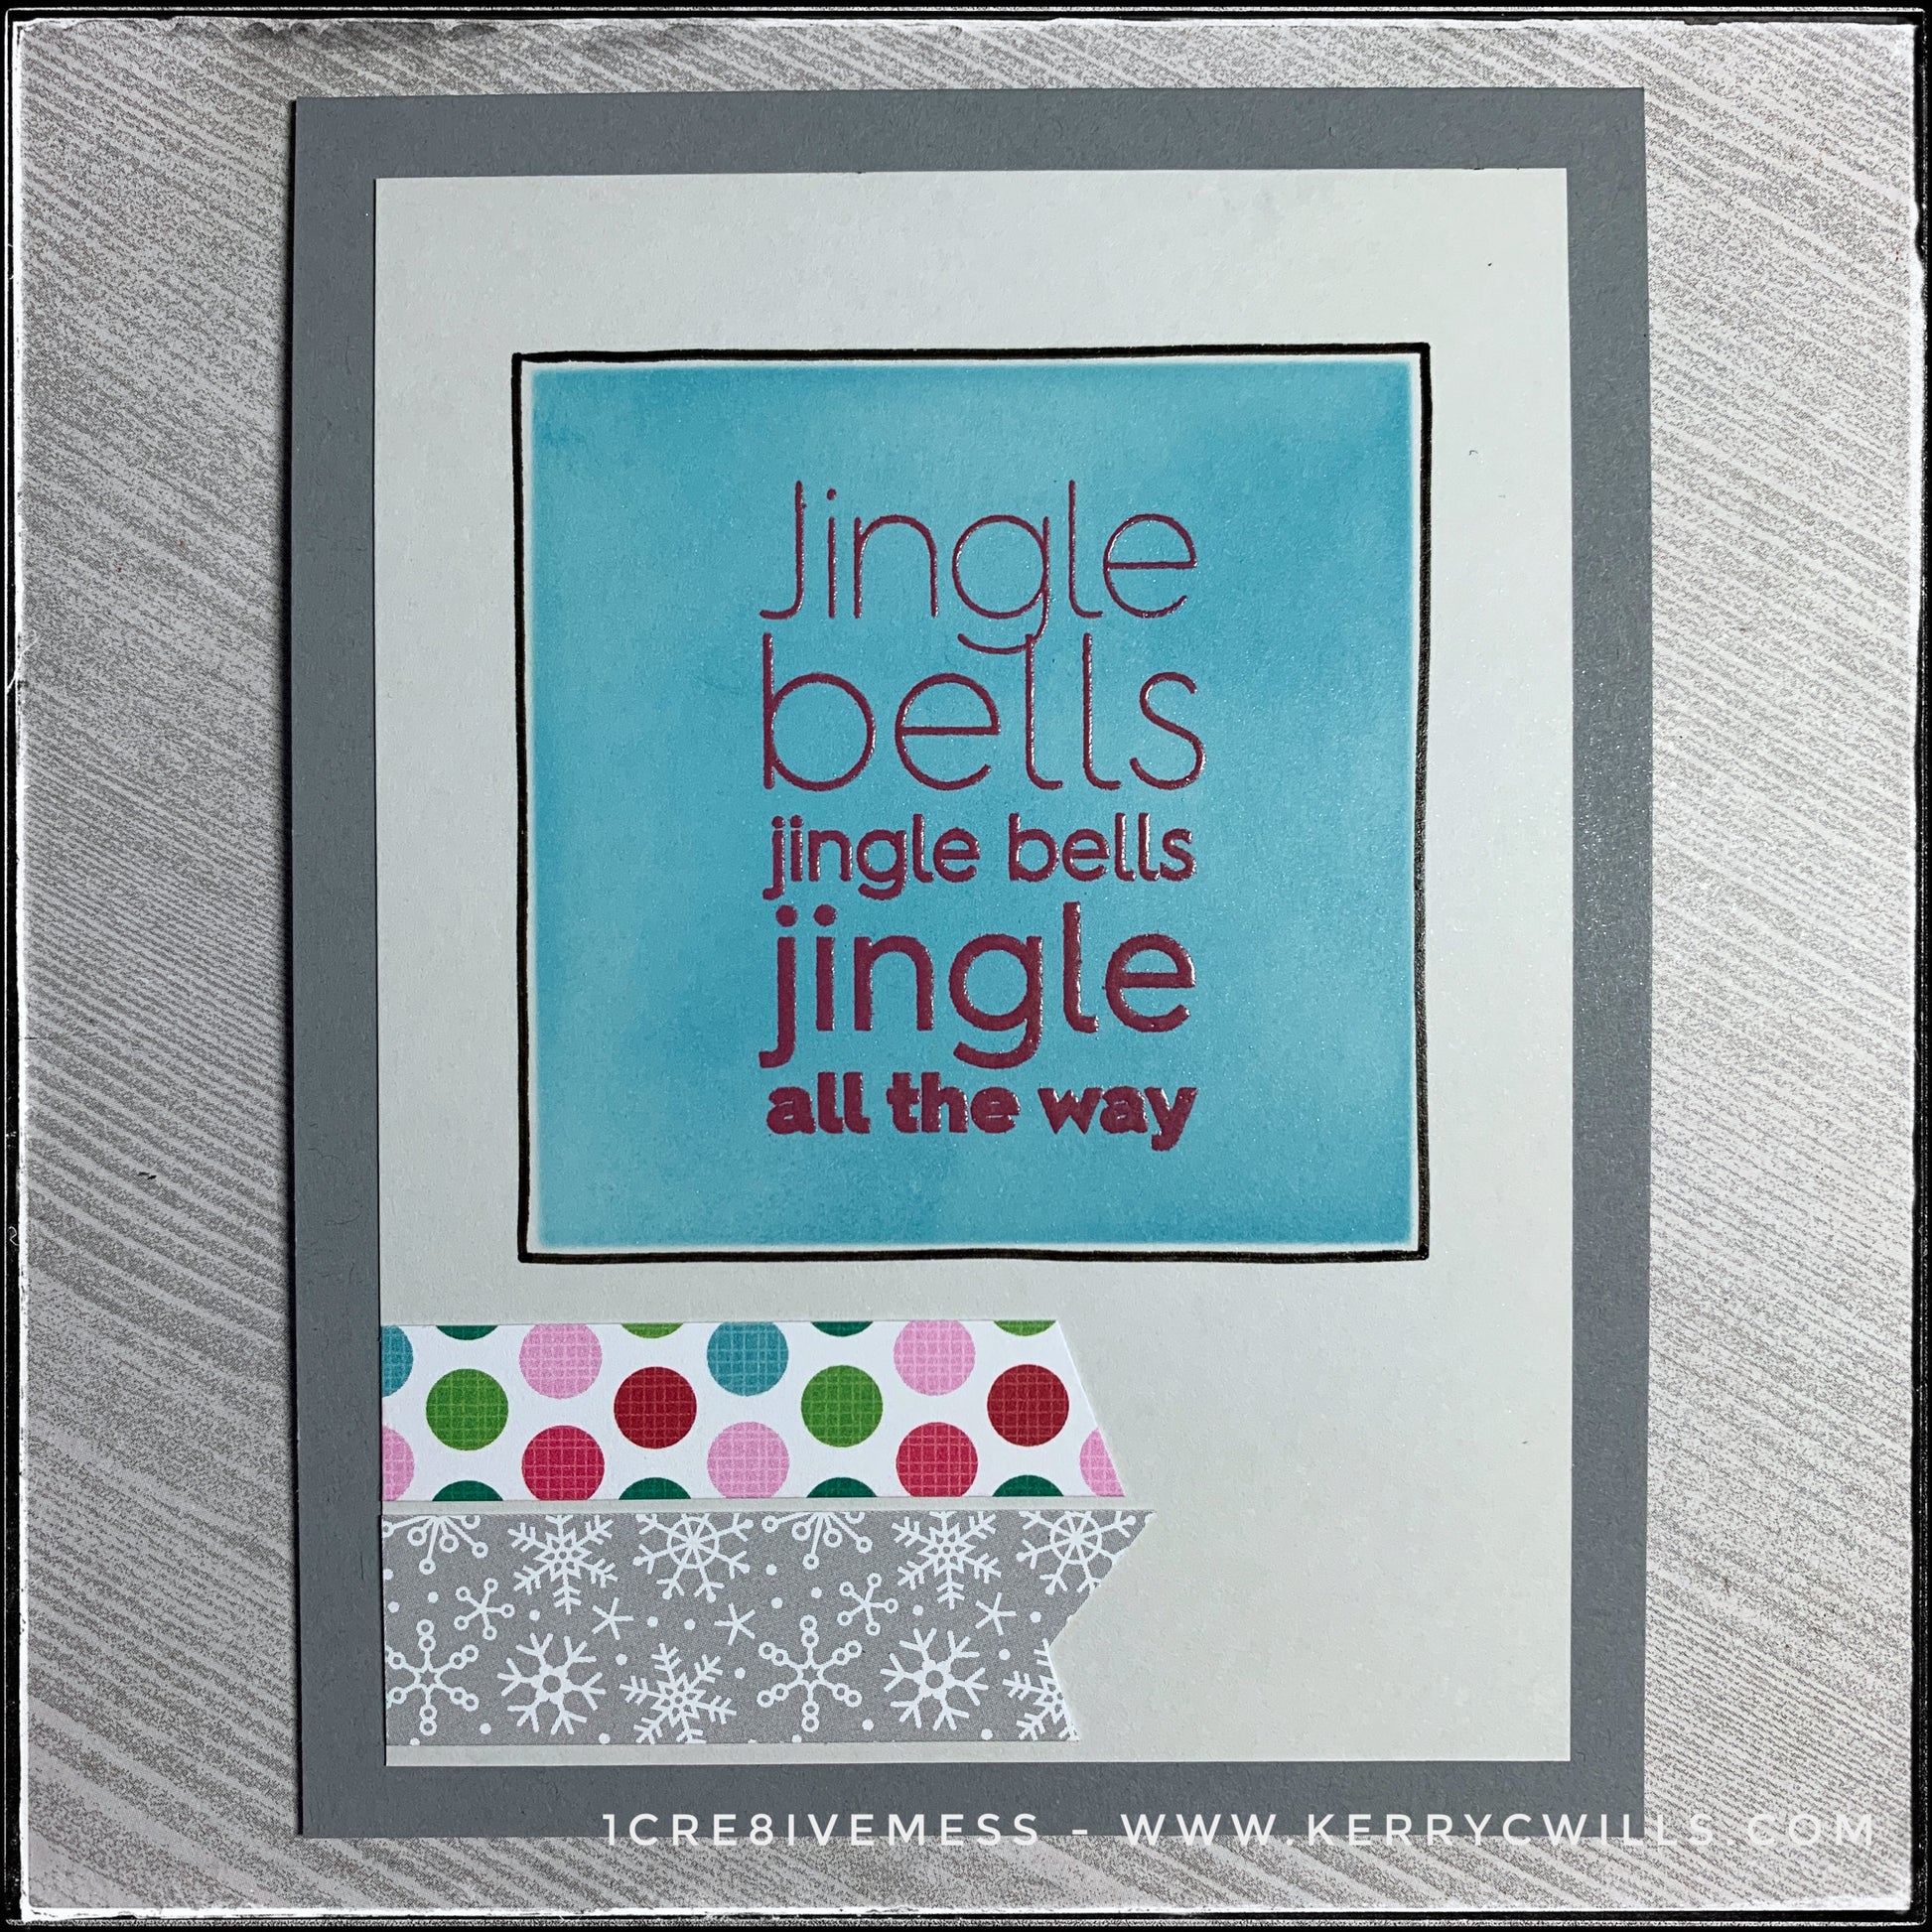 "Jingle bells jingle bells jingle all the way" is the sentiment on this clean and simple card. Two different patterns form two tiny banners near the bottom left corner of the card front. Hand drawn lines add a nice texture, as does the clear embossing of the sentiment. This card is wonderful for any and every winter holiday!